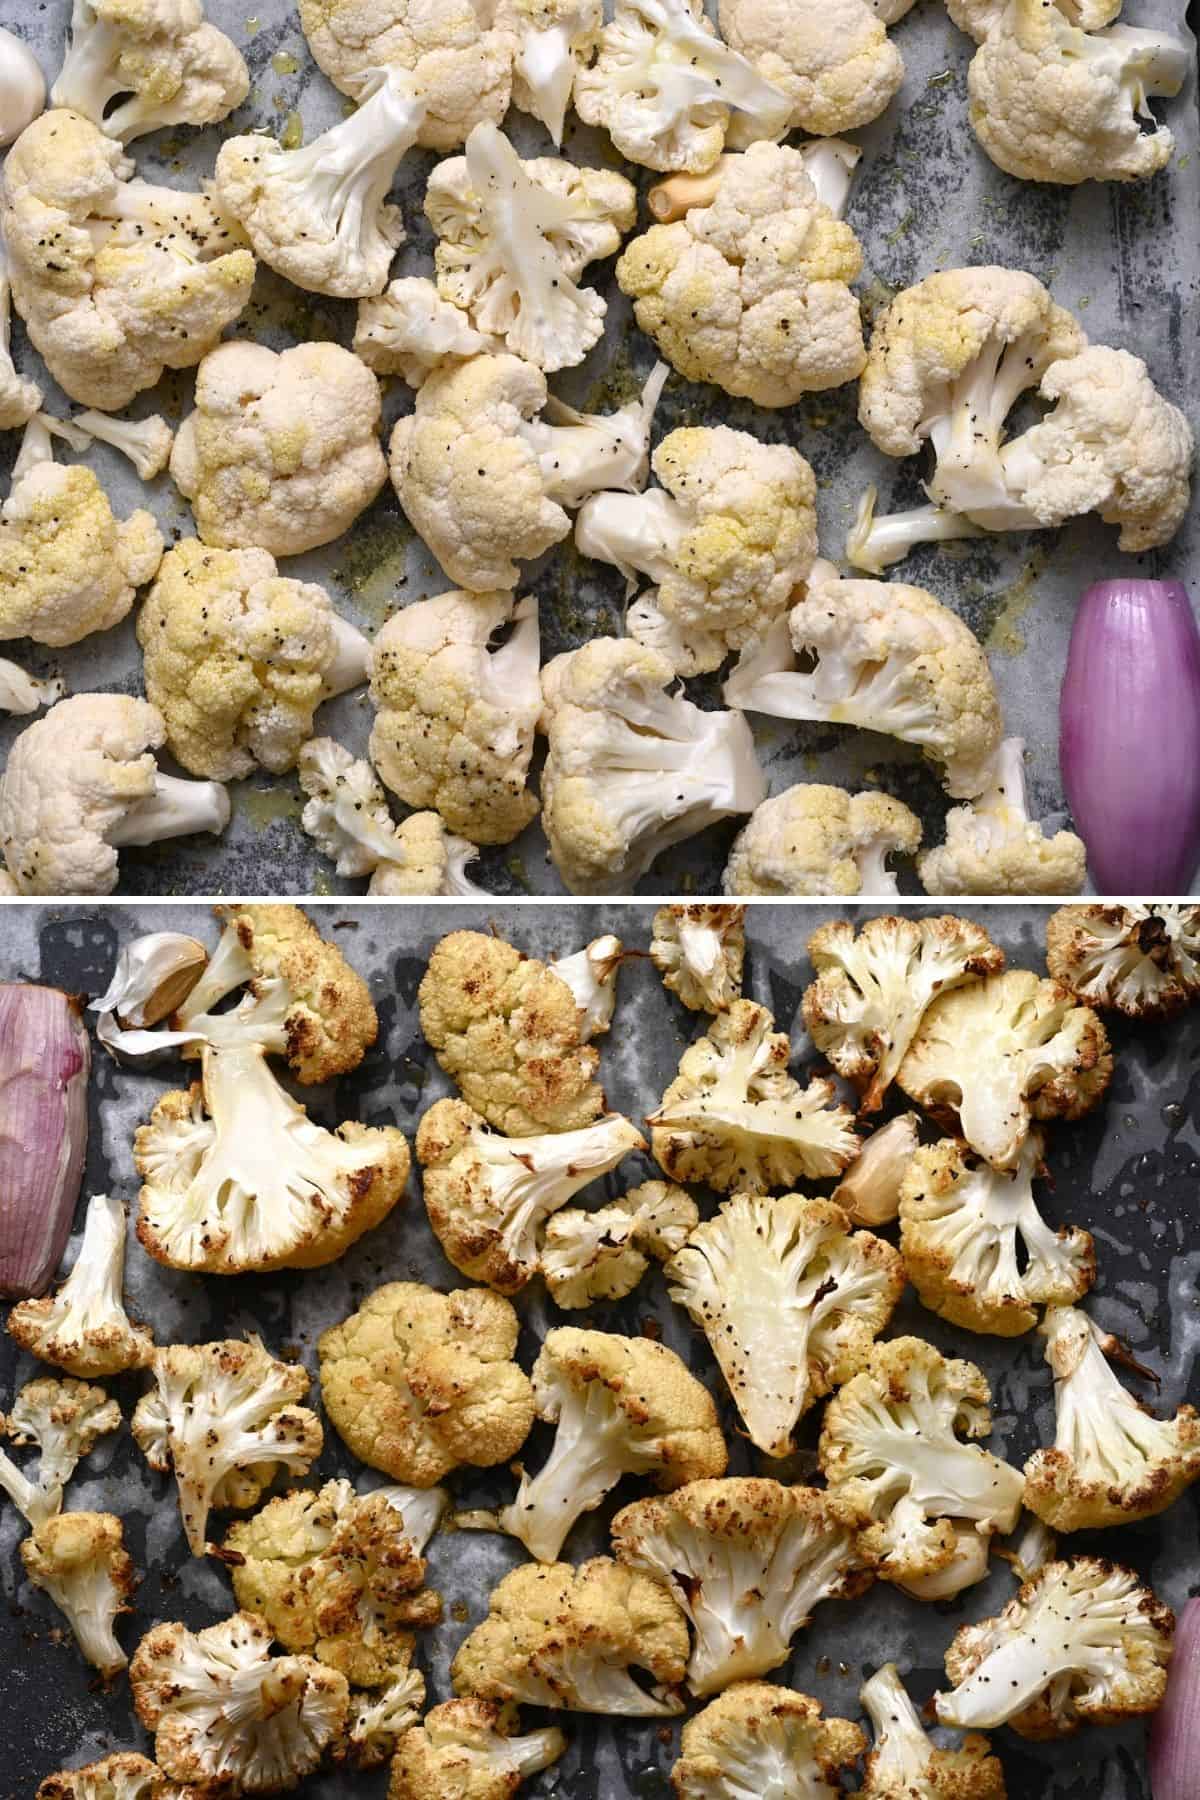 Before and after roasting cauliflower